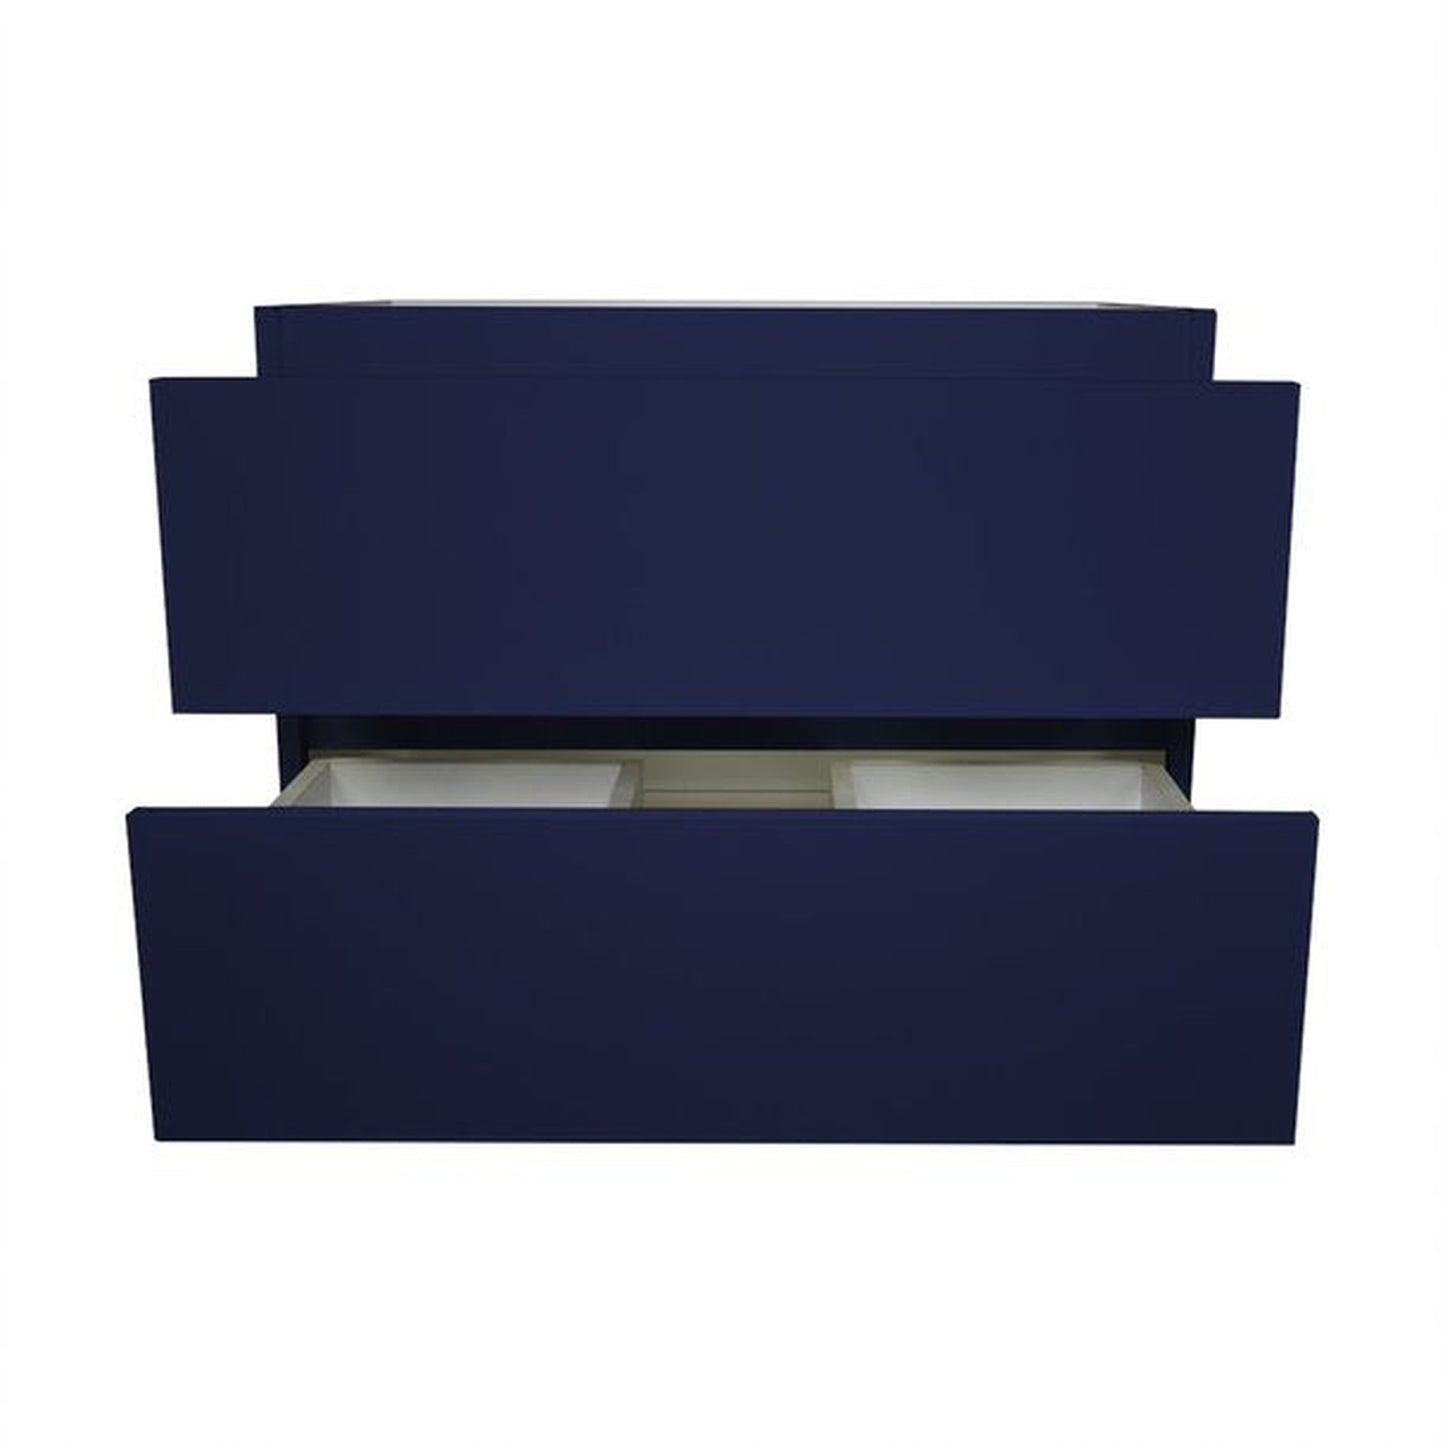 Volpa USA Salt 24" x 18" Navy Wall-Mounted Floating Bathroom Vanity Cabinet with Drawers